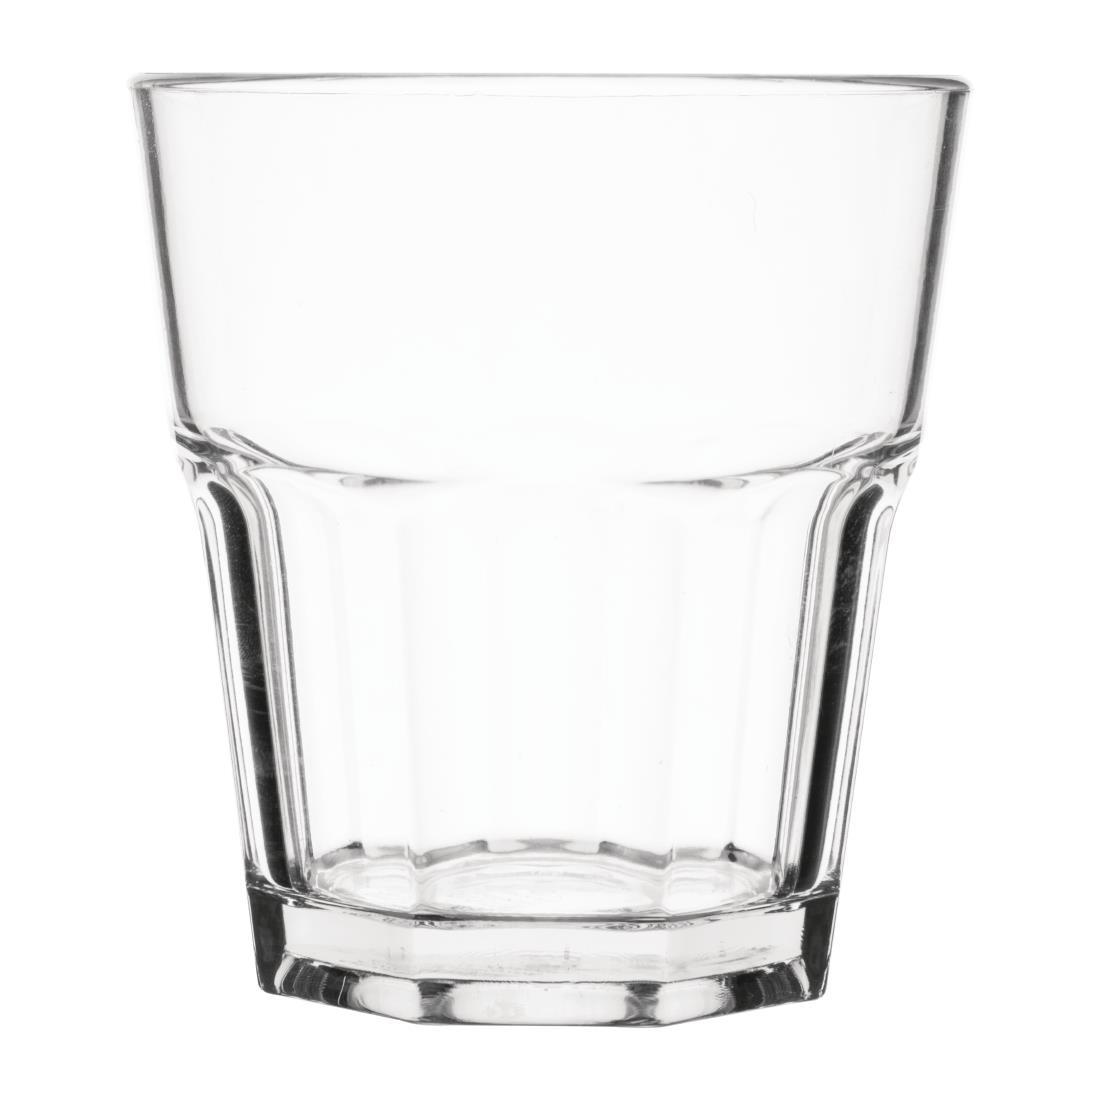 Olympia Kristallon Orleans Rocks Tumblers 250ml (Pack of 12) - DY792  - 1